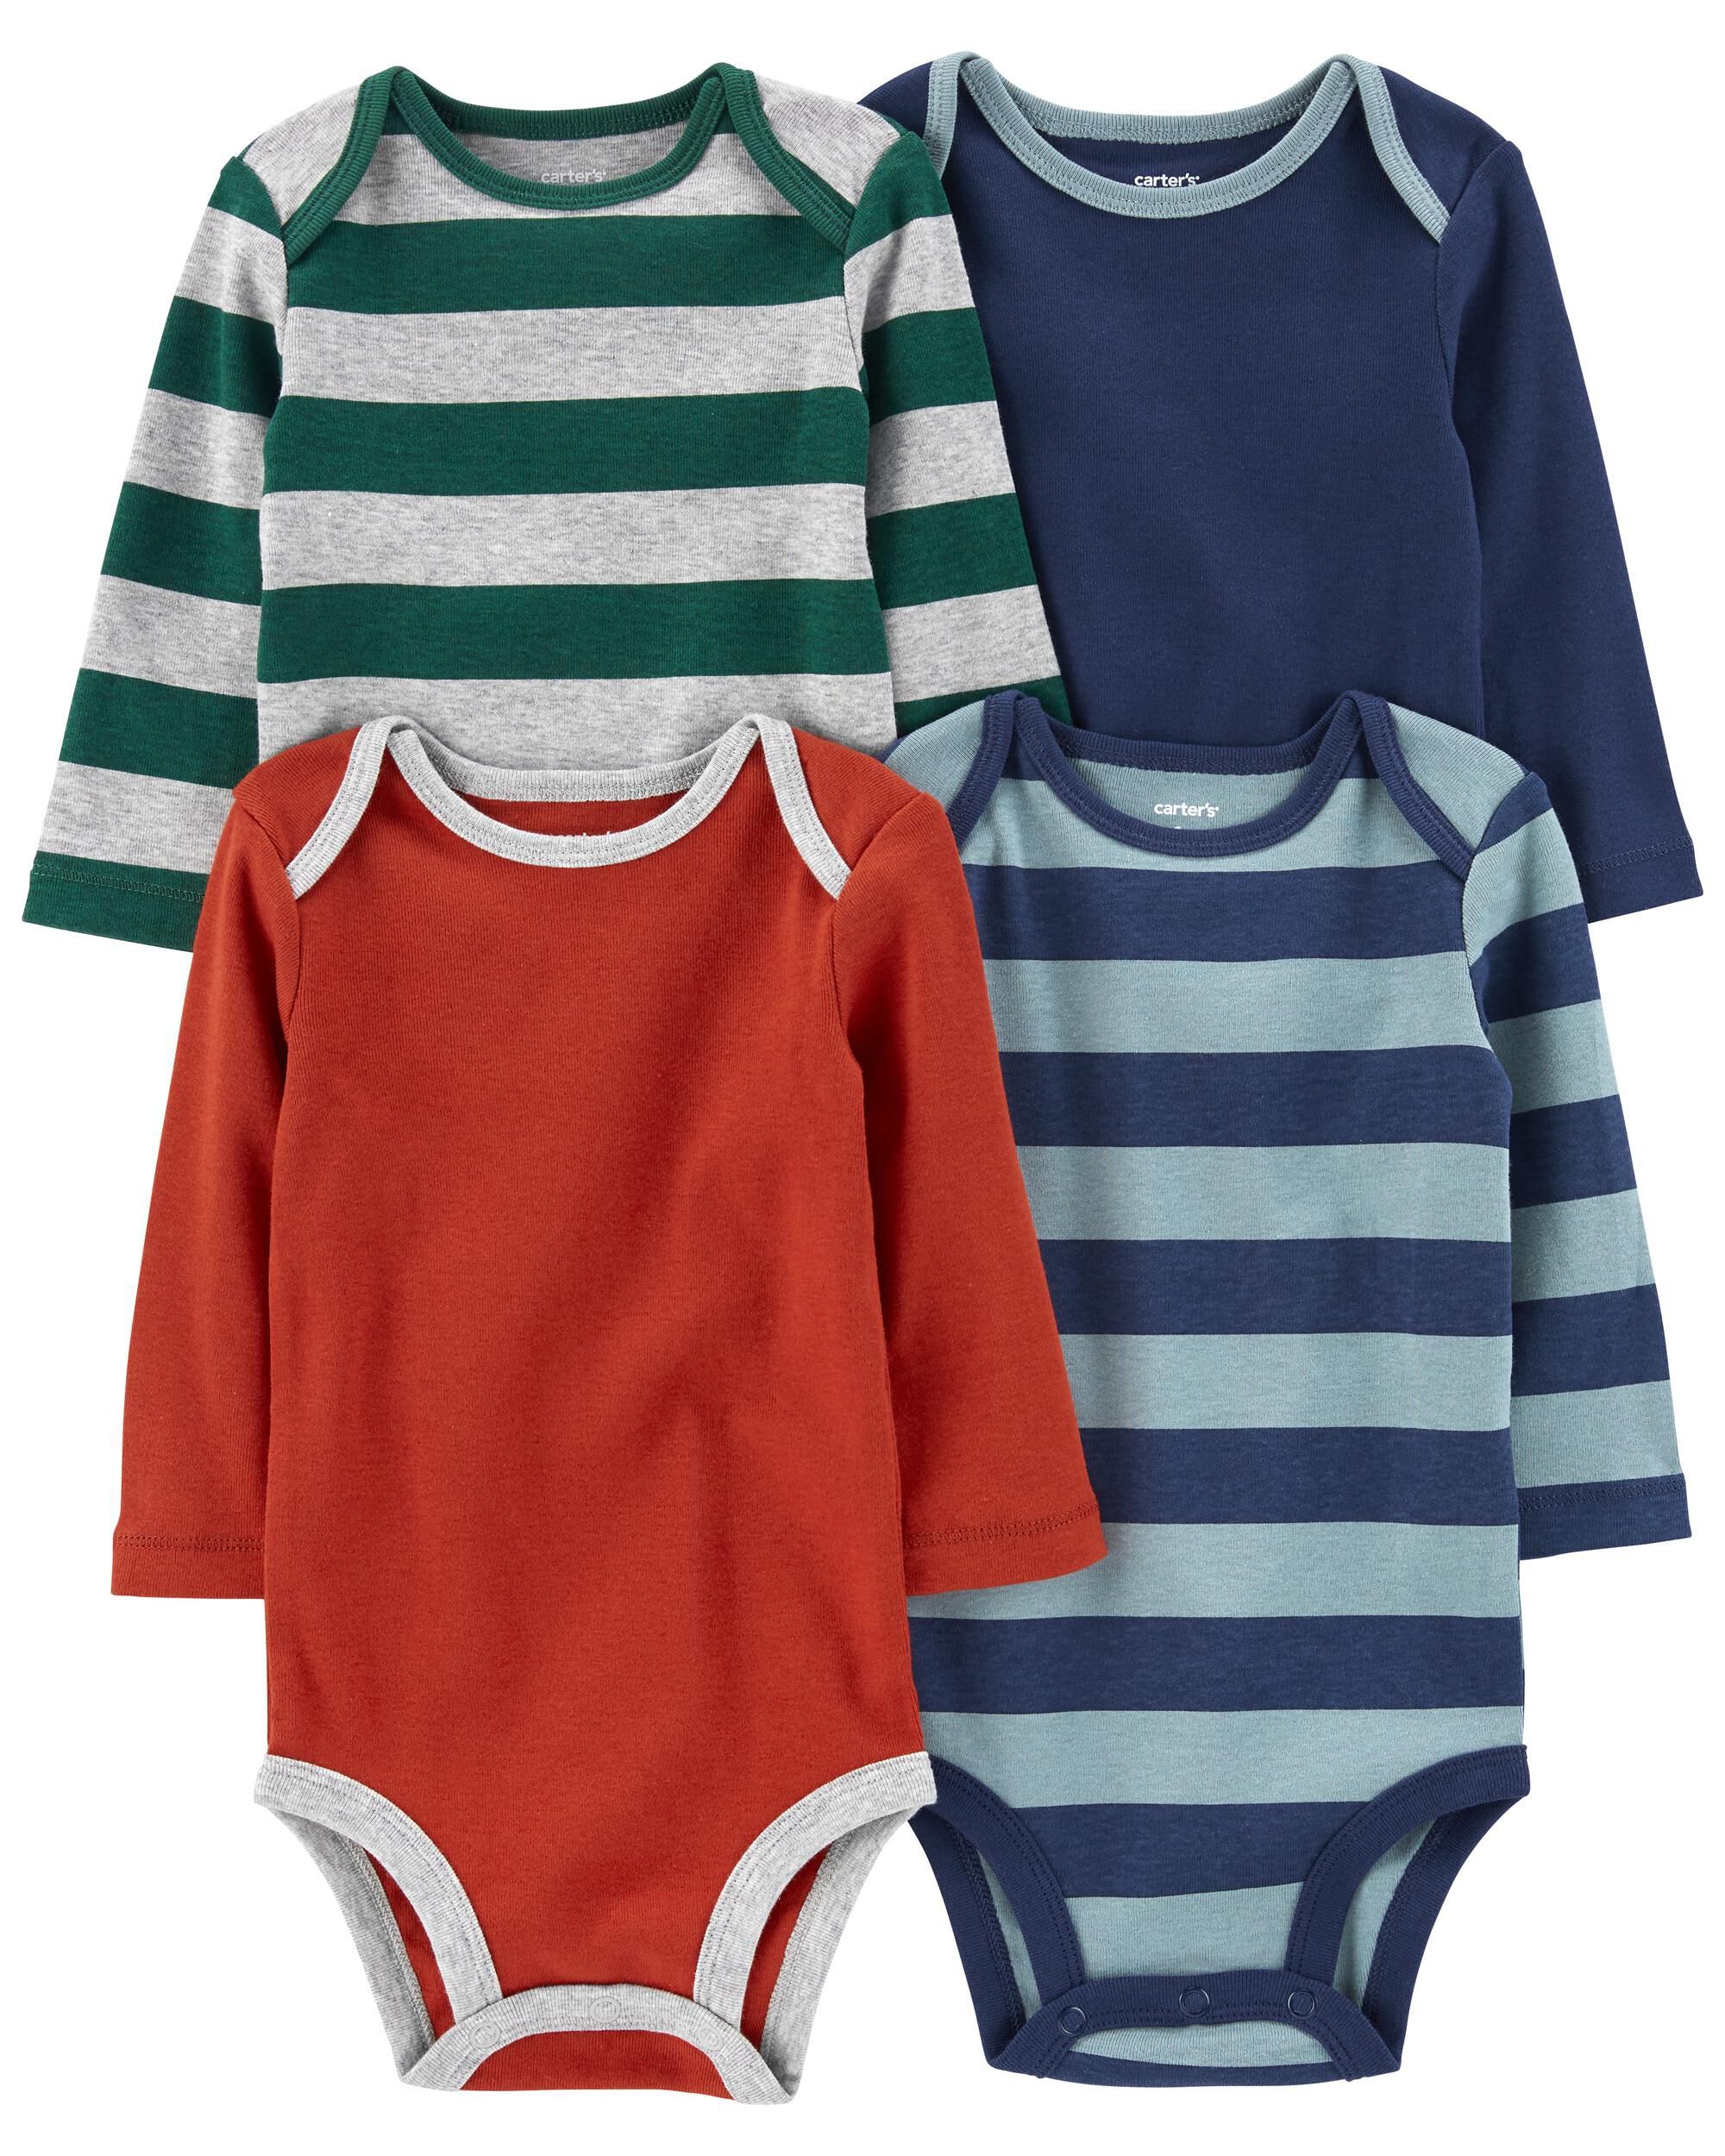 Baby 4-Pack Long-Sleeve Bodysuits | Carter's